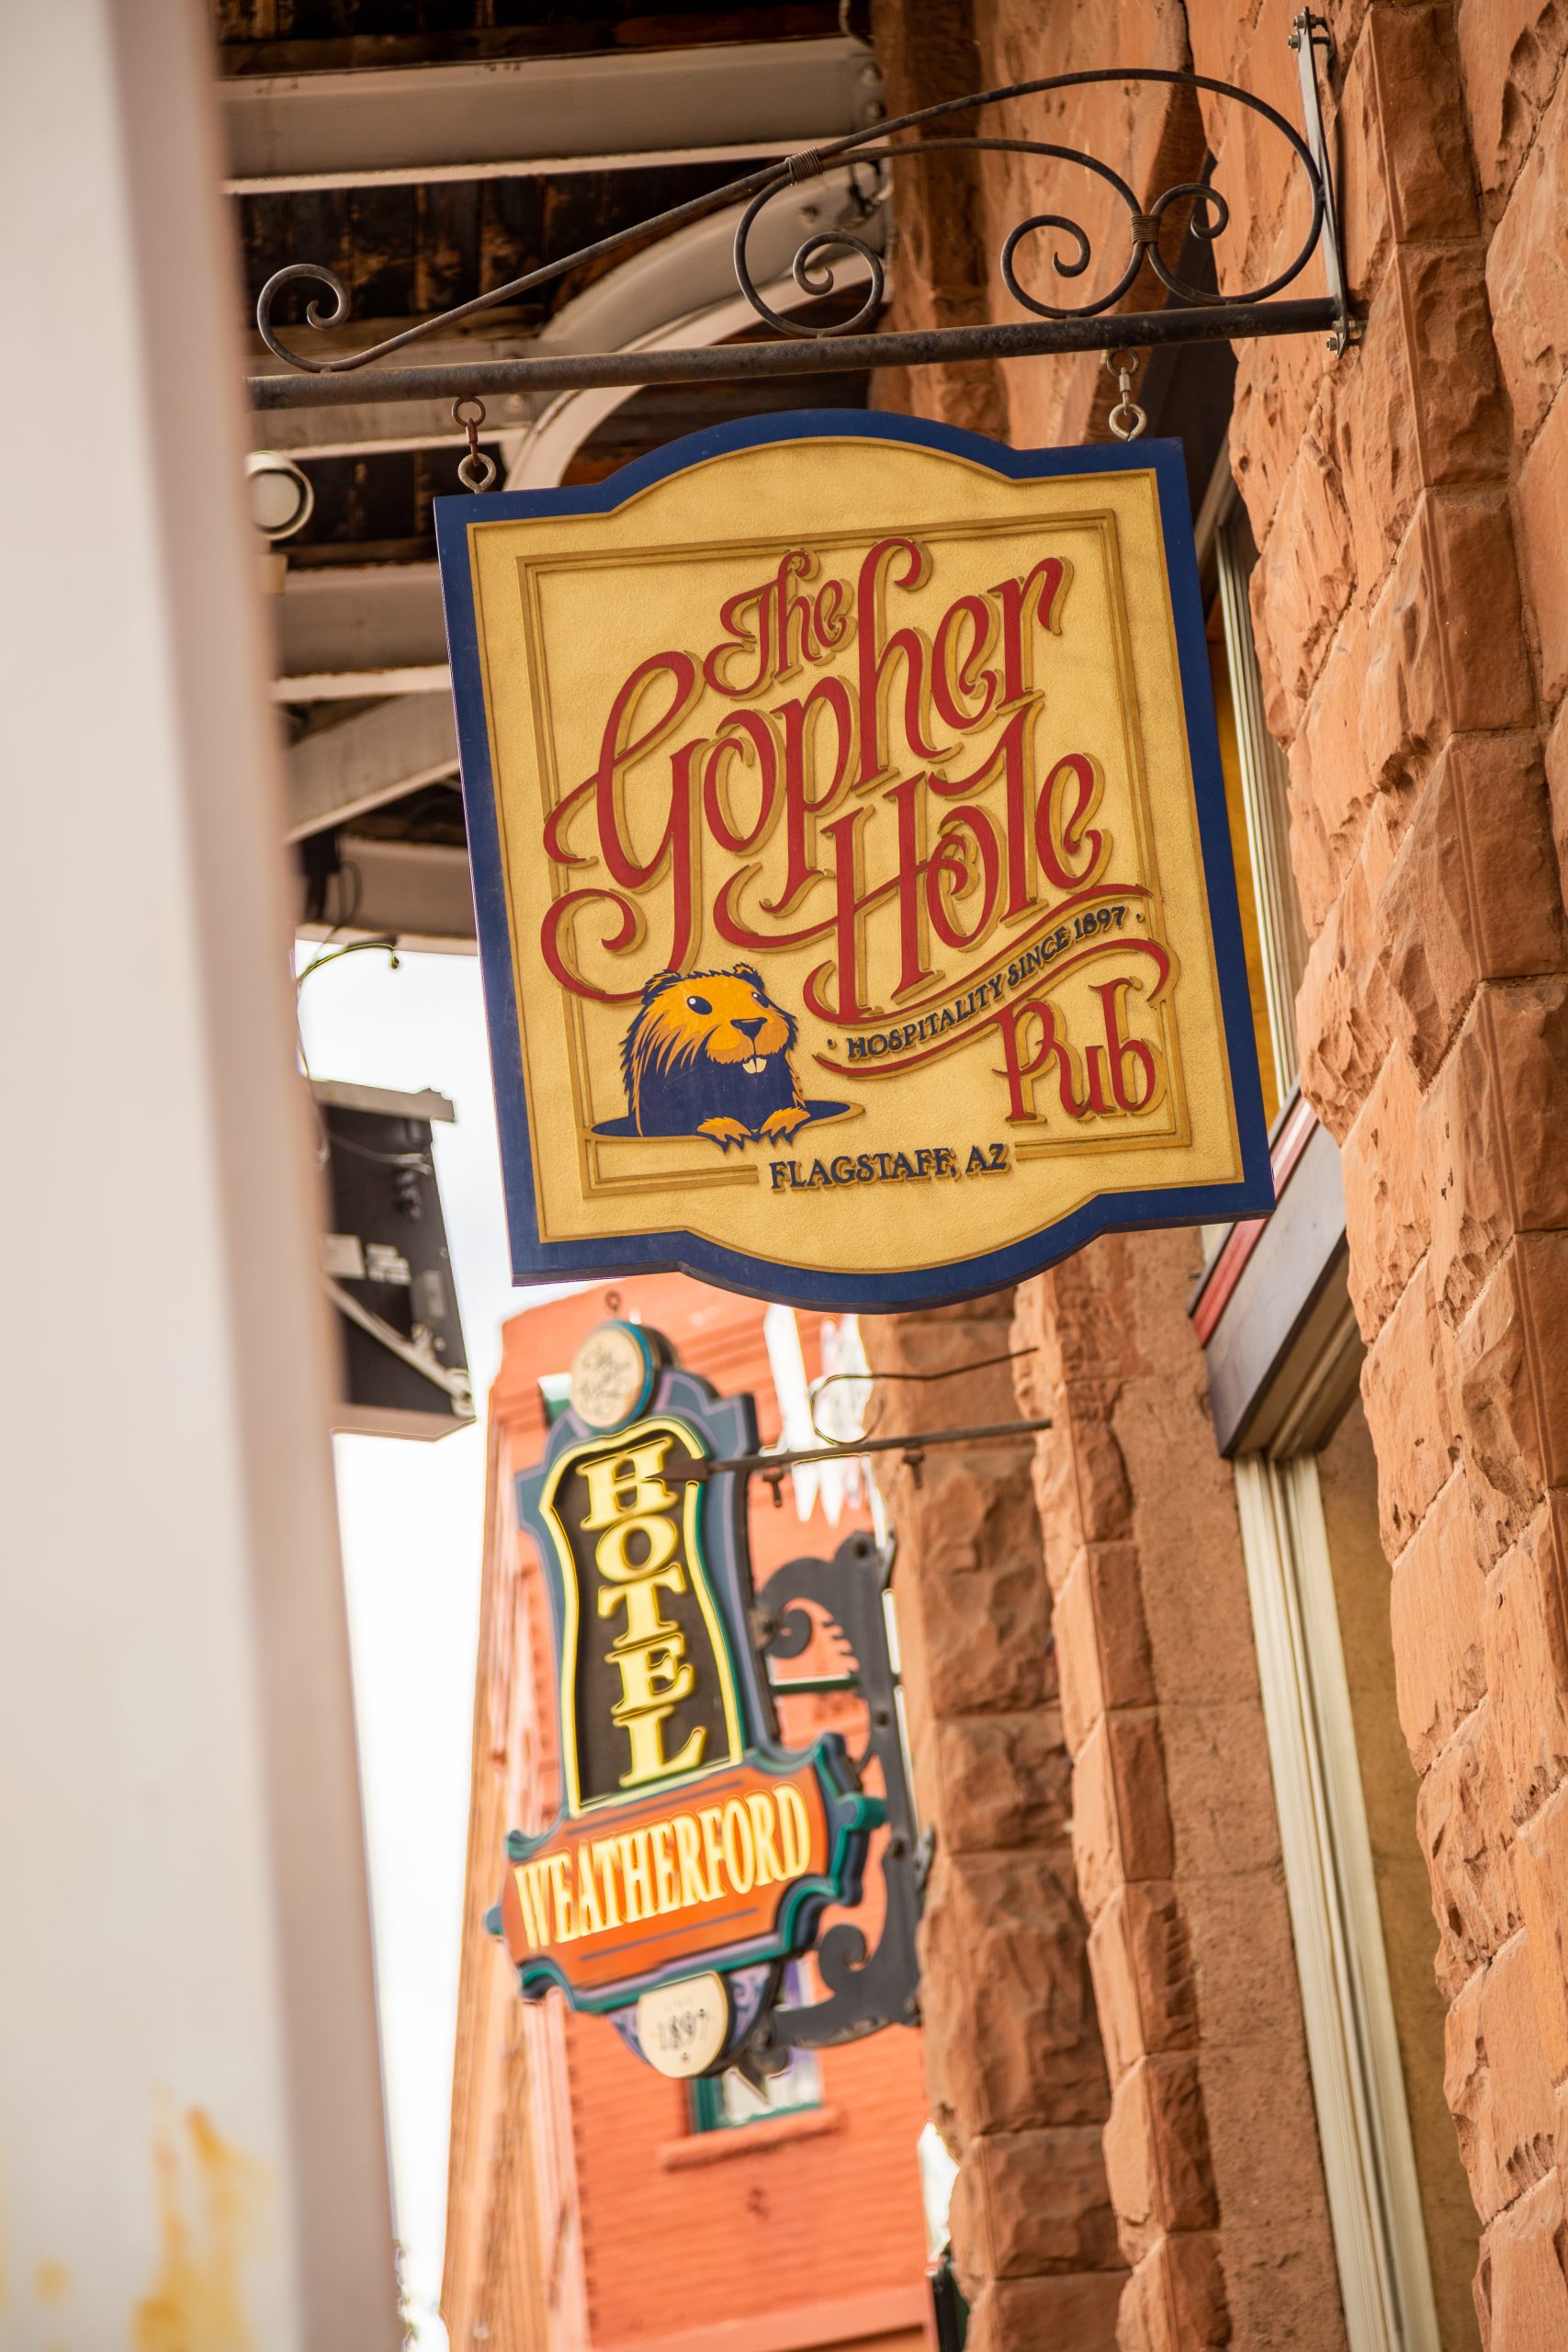 The Gopher Hole Pub, the oldest bar around | cool speakeasy at the Weatherford Hotel | Karaoke and Live Music | Pool Tables, Billiards | Historic Bar